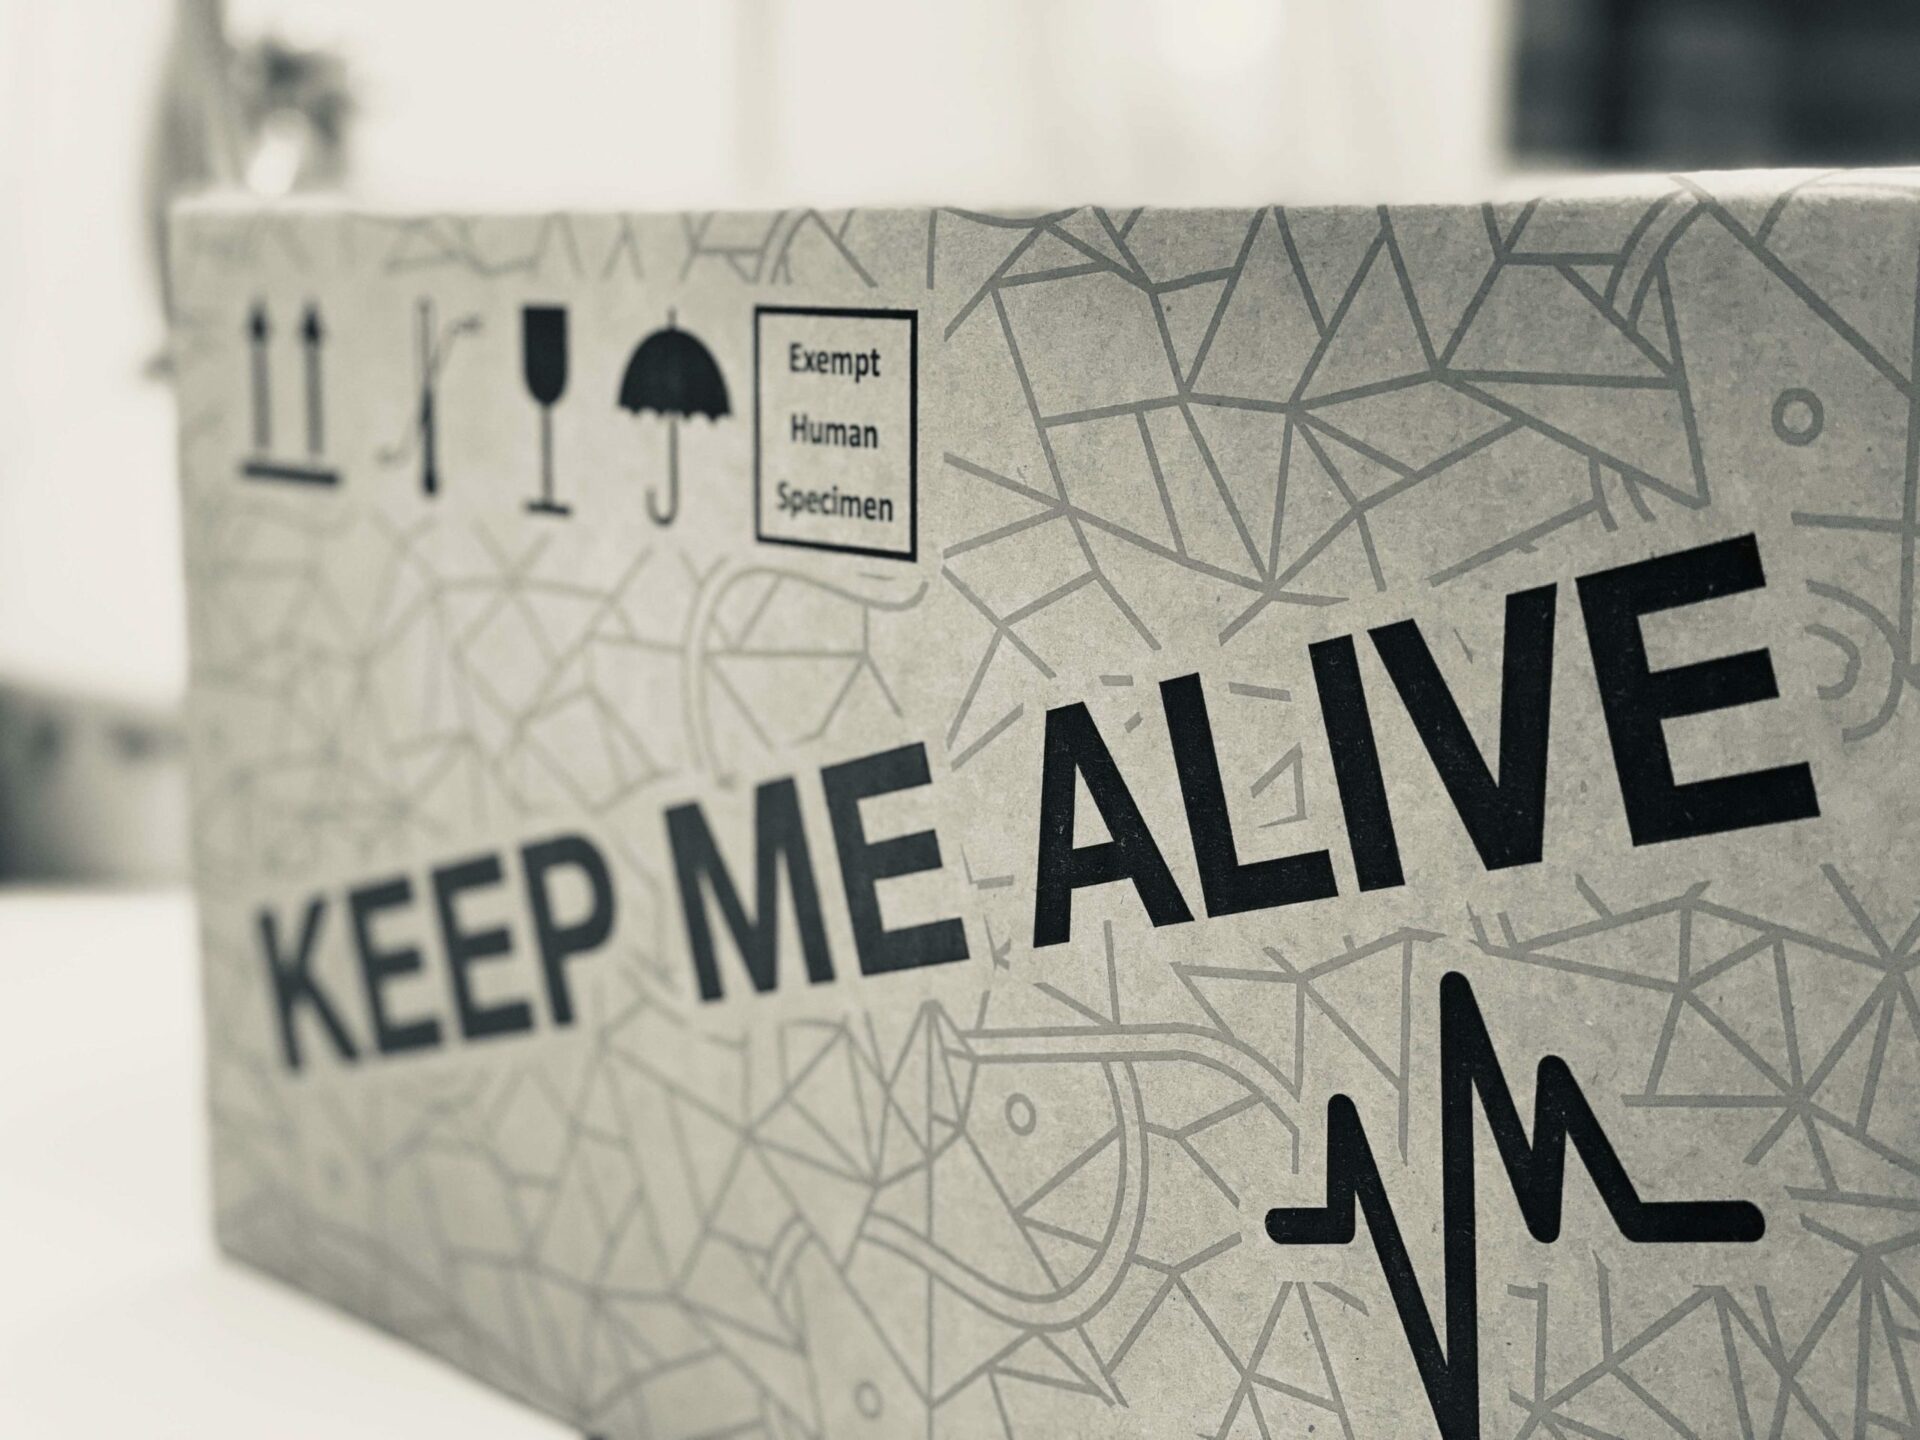 Preview of the new packaging with icons, keep me alive inscription and ECG icon.